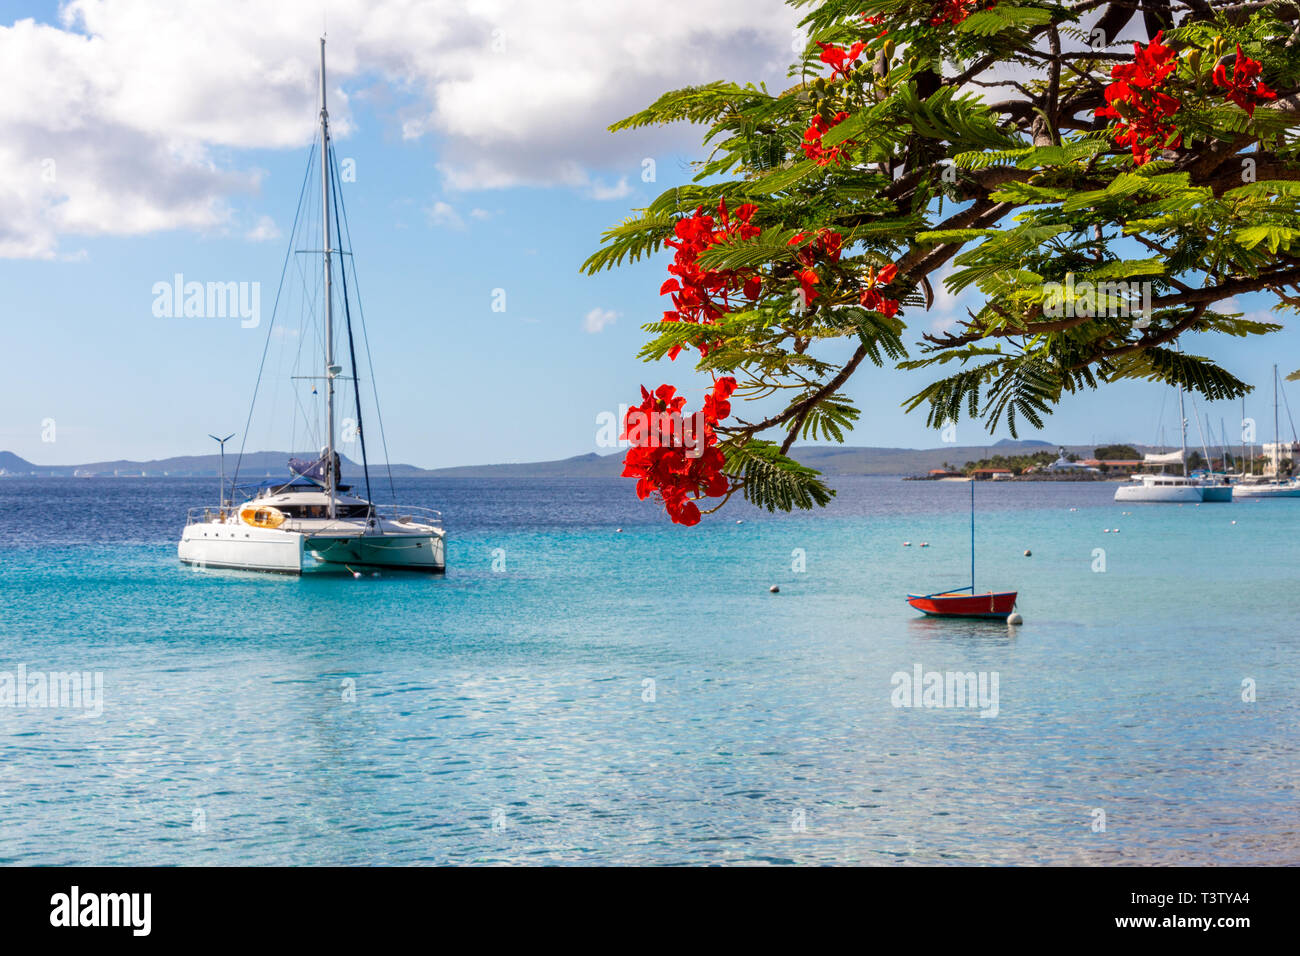 Catamaran boat in the pacific sea with a flame tree in front Stock Photo